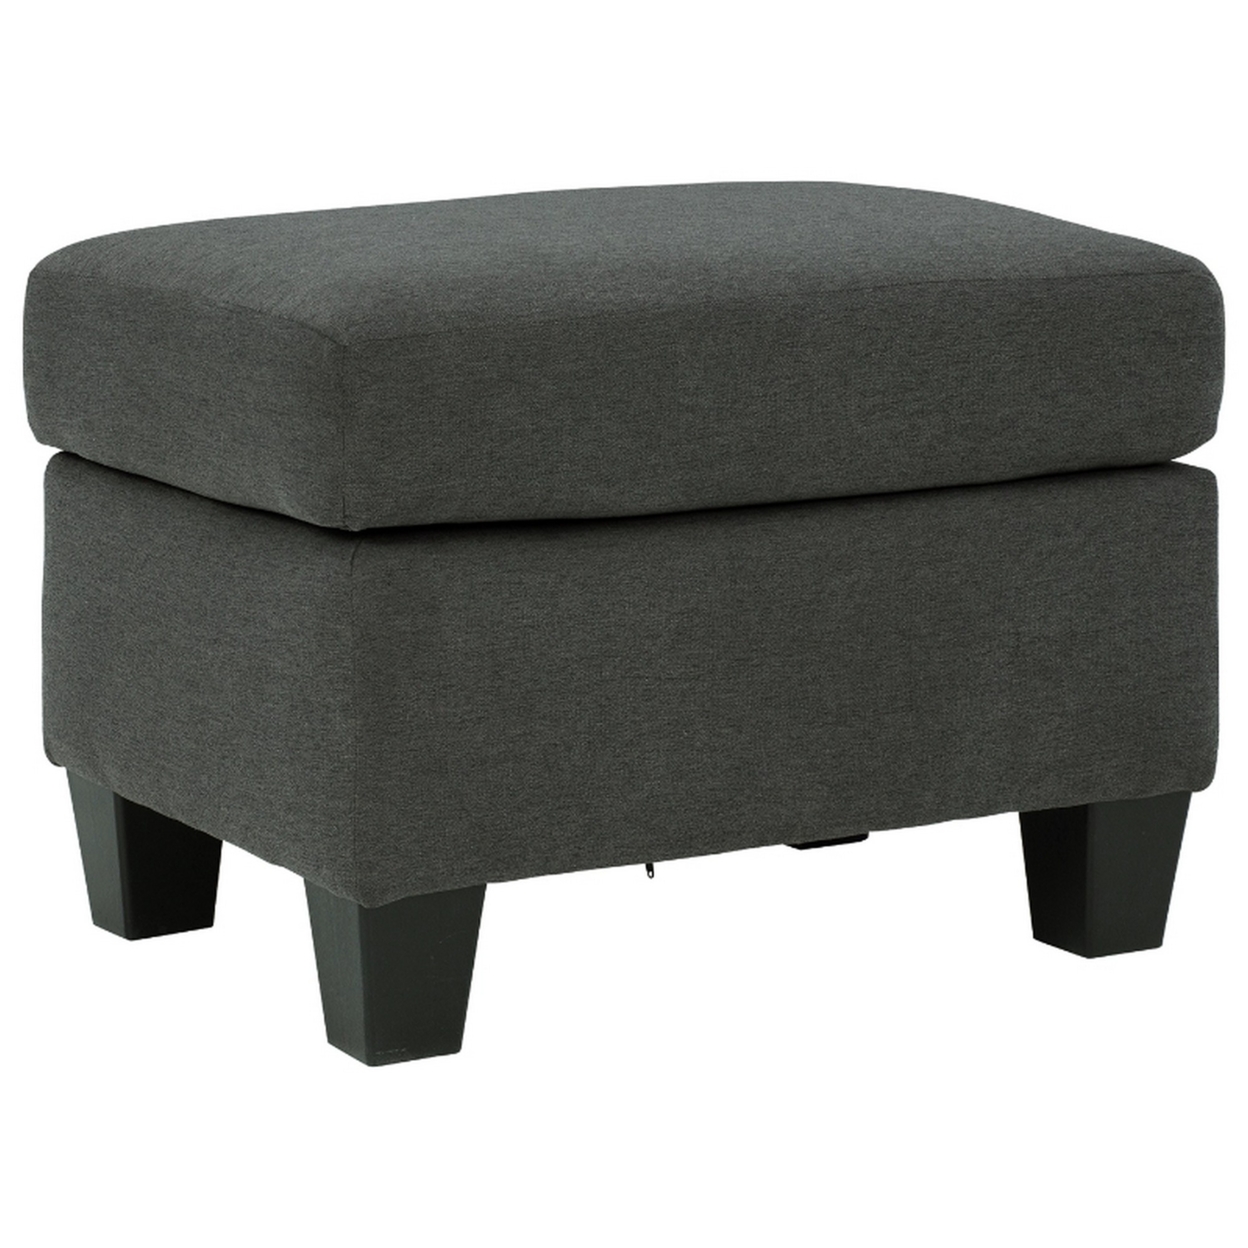 Ottoman With Fabric Upholstery And Tapered Legs, Charcoal- Saltoro Sherpi